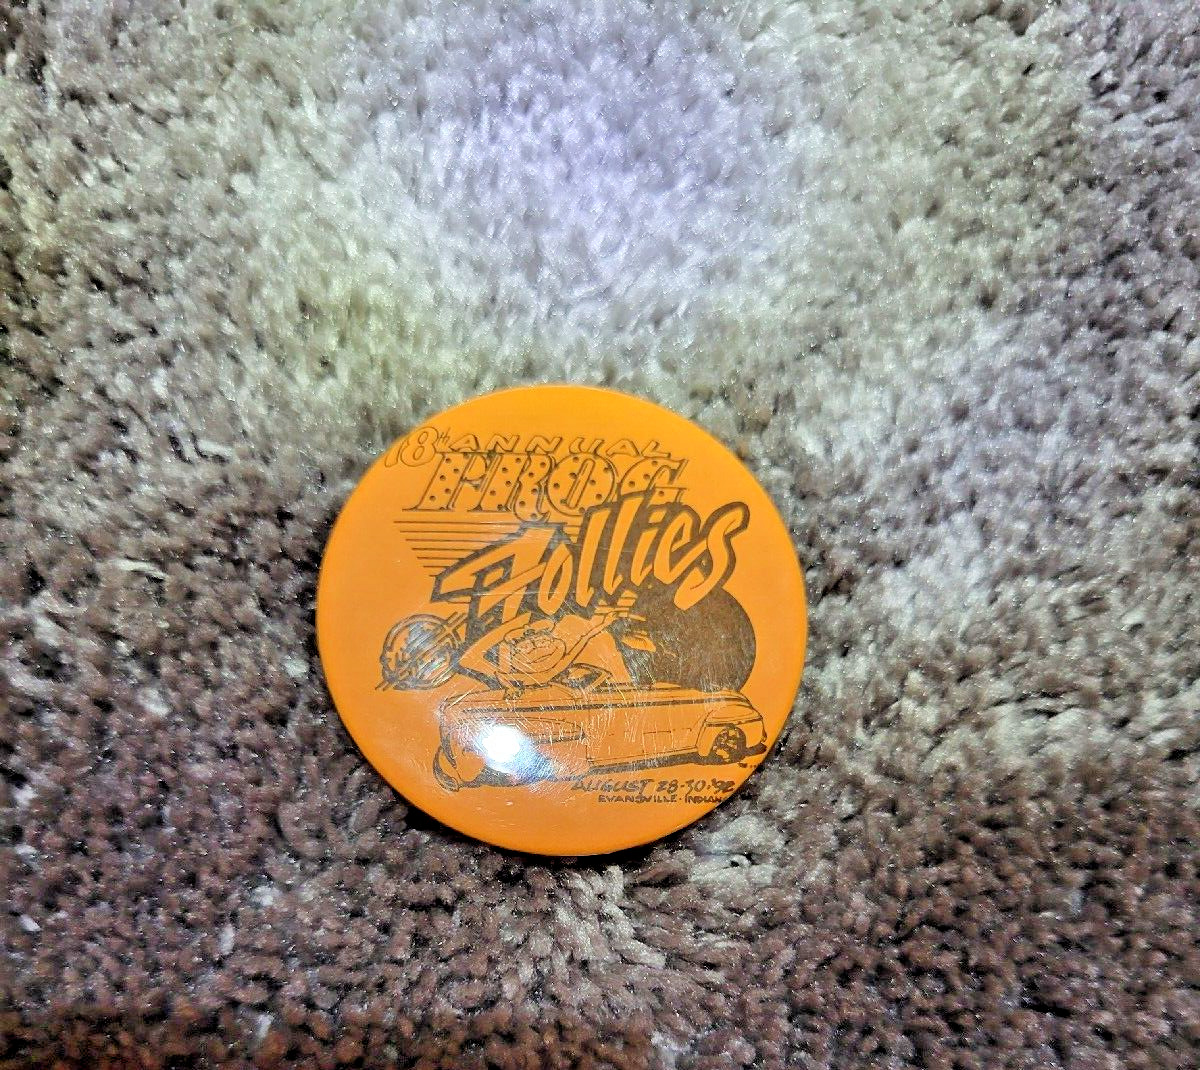 Vintage 18th Annual Frog Follies Evansville, Indiana 1992 Button